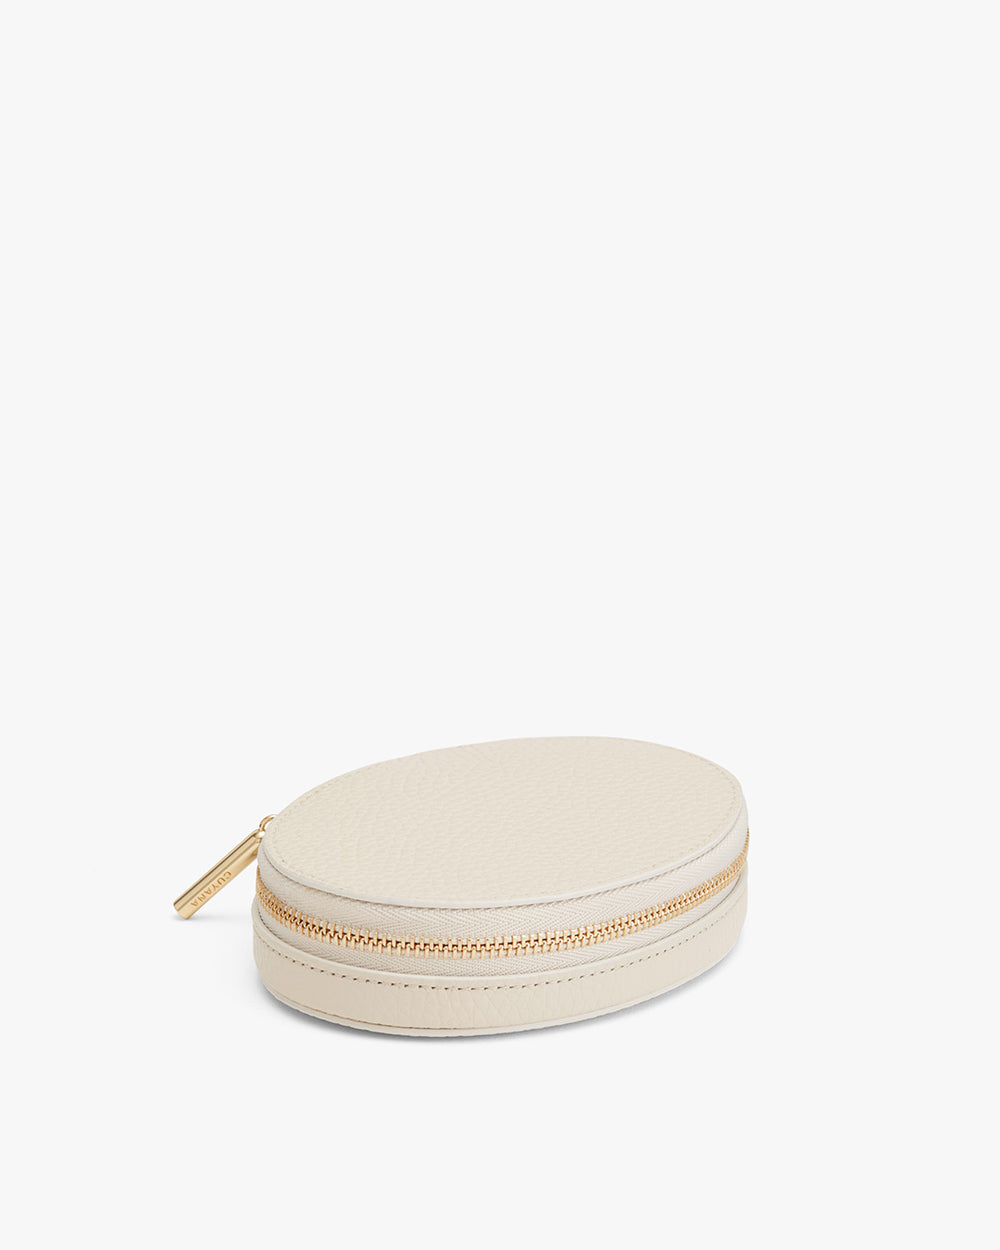 Small oval-shaped zippered case on a plain background.